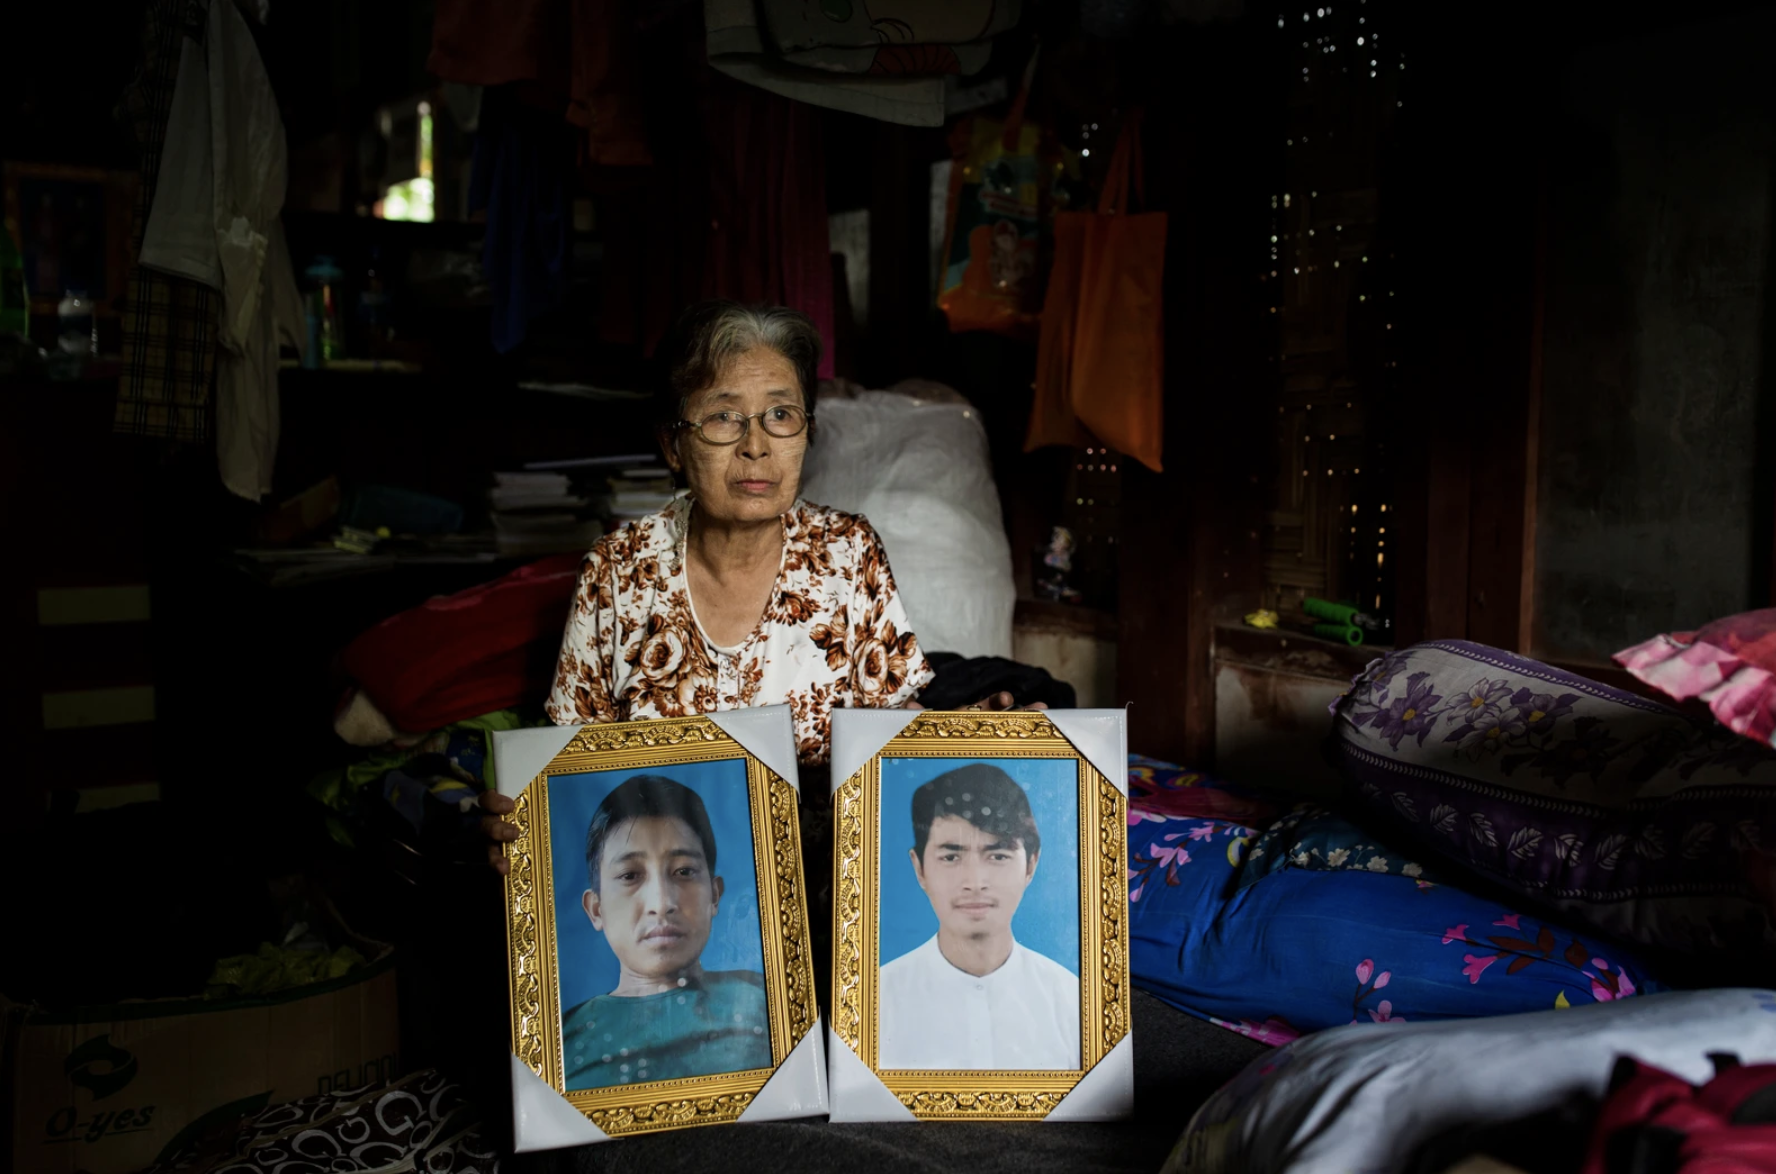 La-Ung Bawk Jan, 73, shows photos of her son-in-law, Nhkum La Di, and her grandson, Nhkum Awng Li, in her home in Myitkyina, Kachin State, Myanmar. Image by Hkun Lat. Myanmar, 2020. 